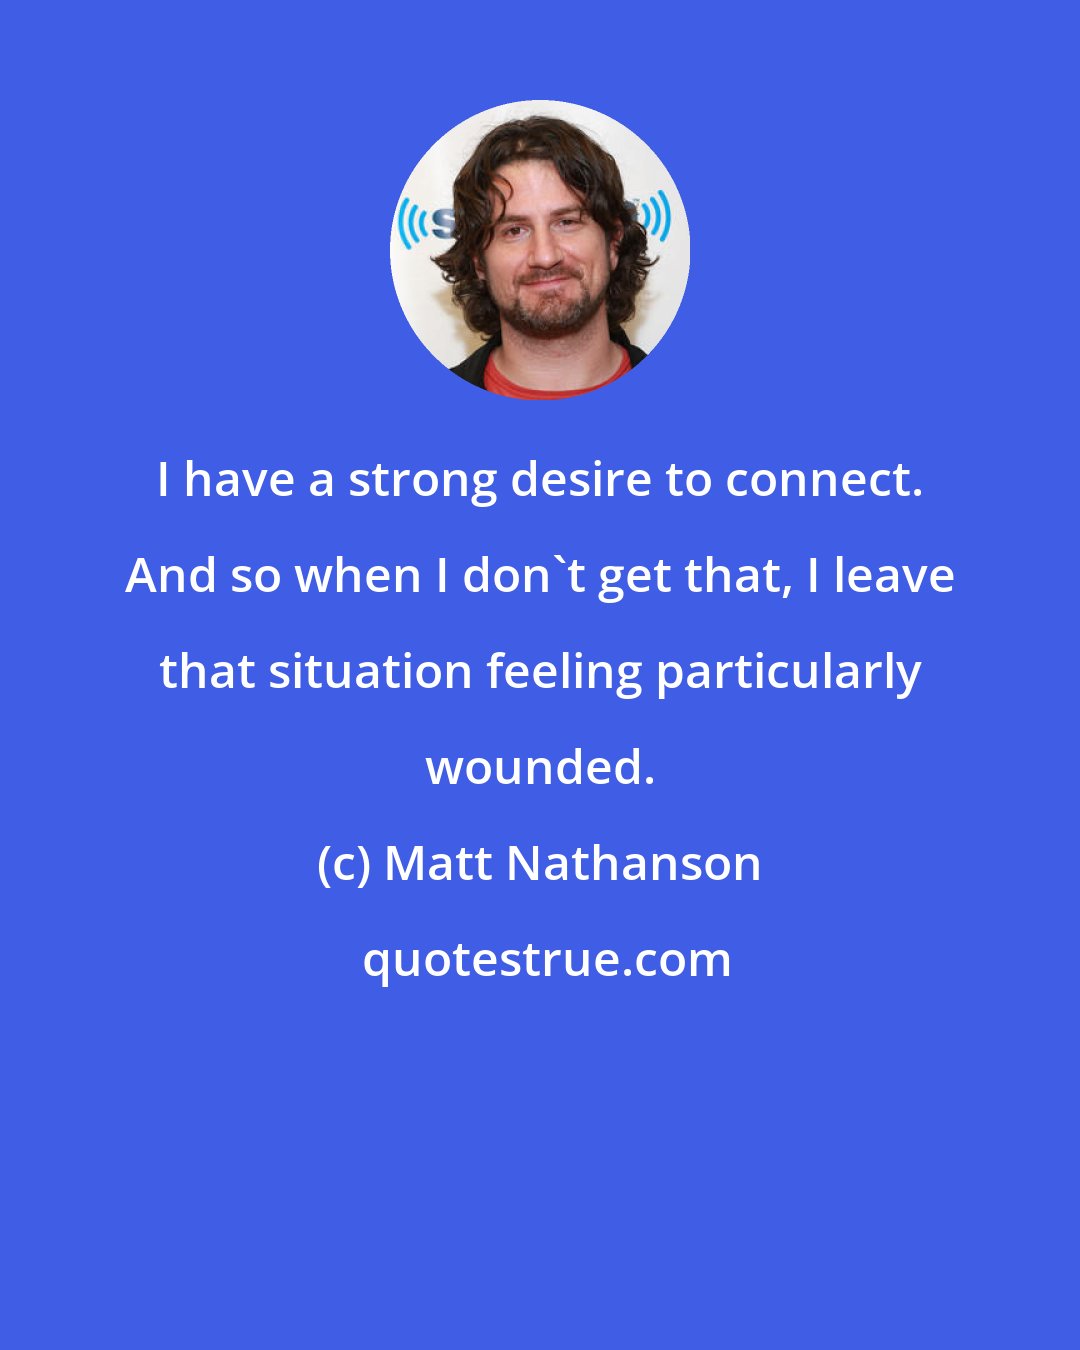 Matt Nathanson: I have a strong desire to connect. And so when I don't get that, I leave that situation feeling particularly wounded.